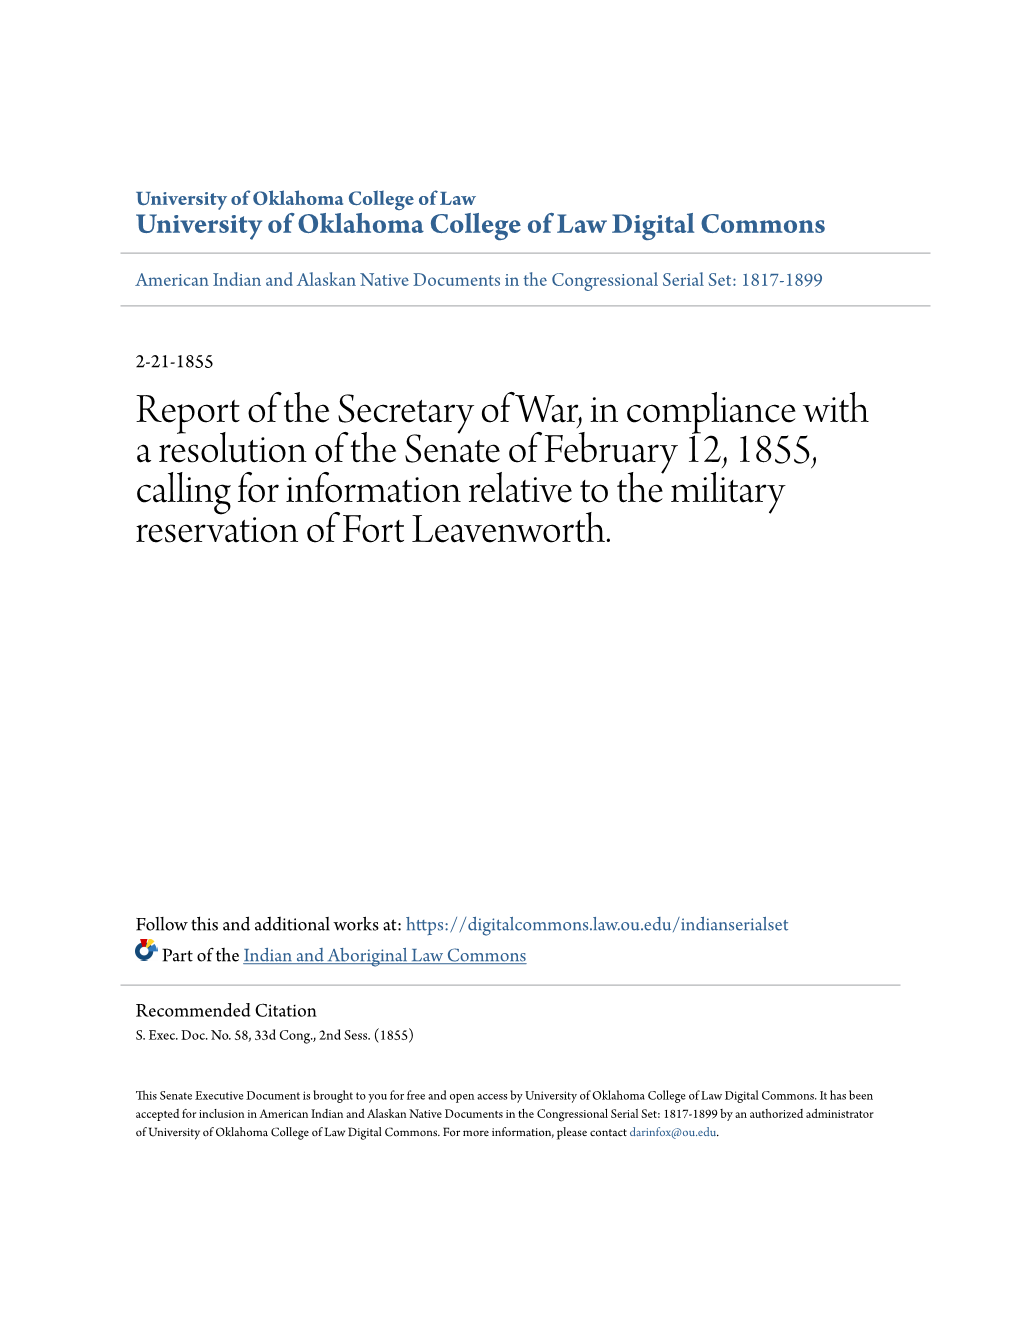 Report of the Secretary of War, in Compliance with a Resolution of The